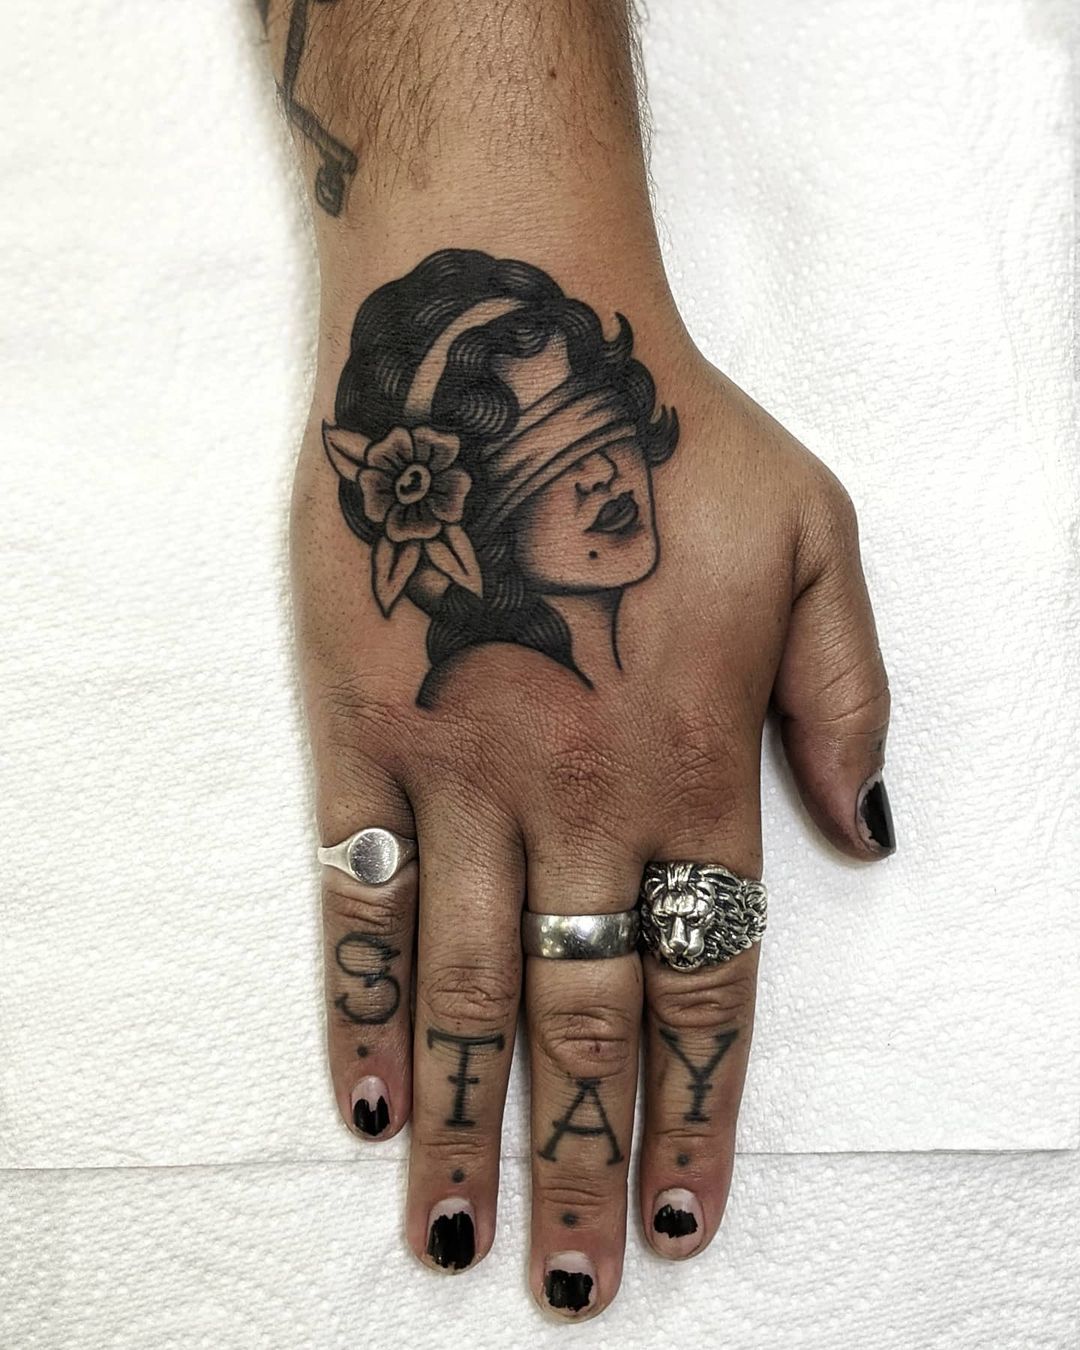 traditional hand tattoo design by dquinn.tattoo